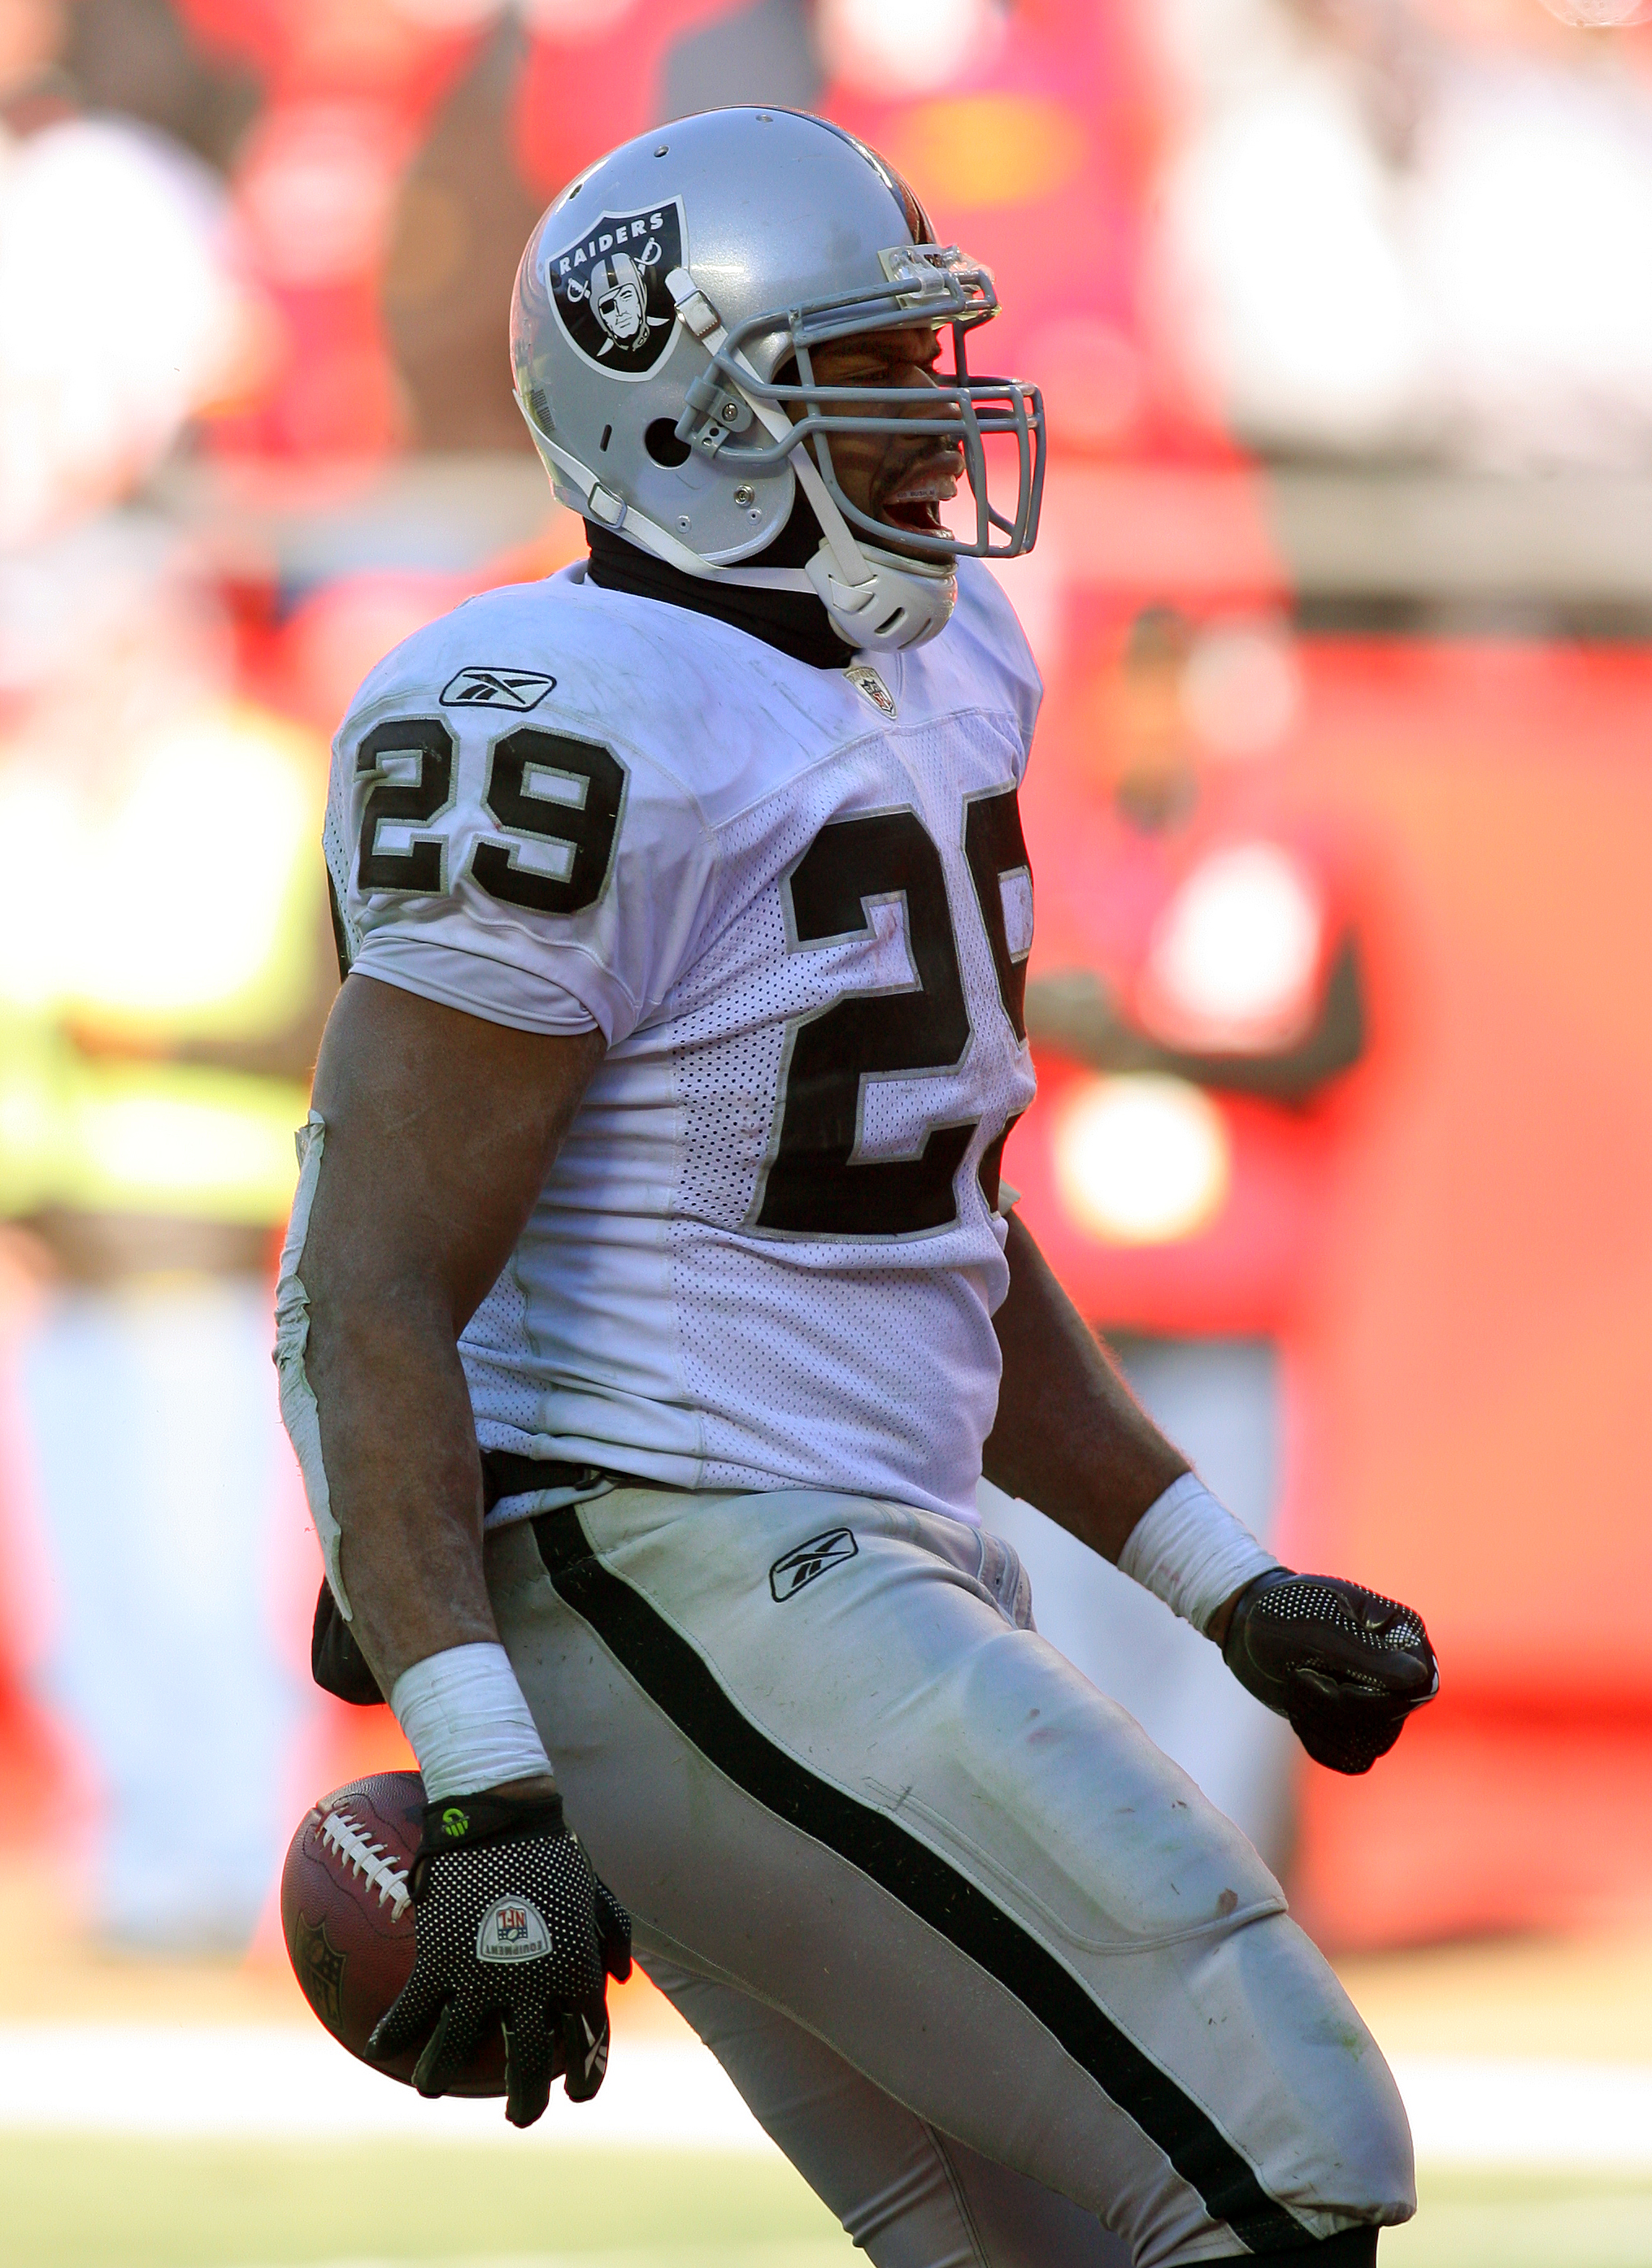 KANSAS CITY, MO - JANUARY 02:  Running back Michael Bush #29 of the Oakland Raiders celebrates after scoring a touchdown in a game against the Kansas City Chiefs at Arrowhead Stadium on January 2, 2011 in Kansas City, Missouri.  (Photo by Tim Umphrey/Gett